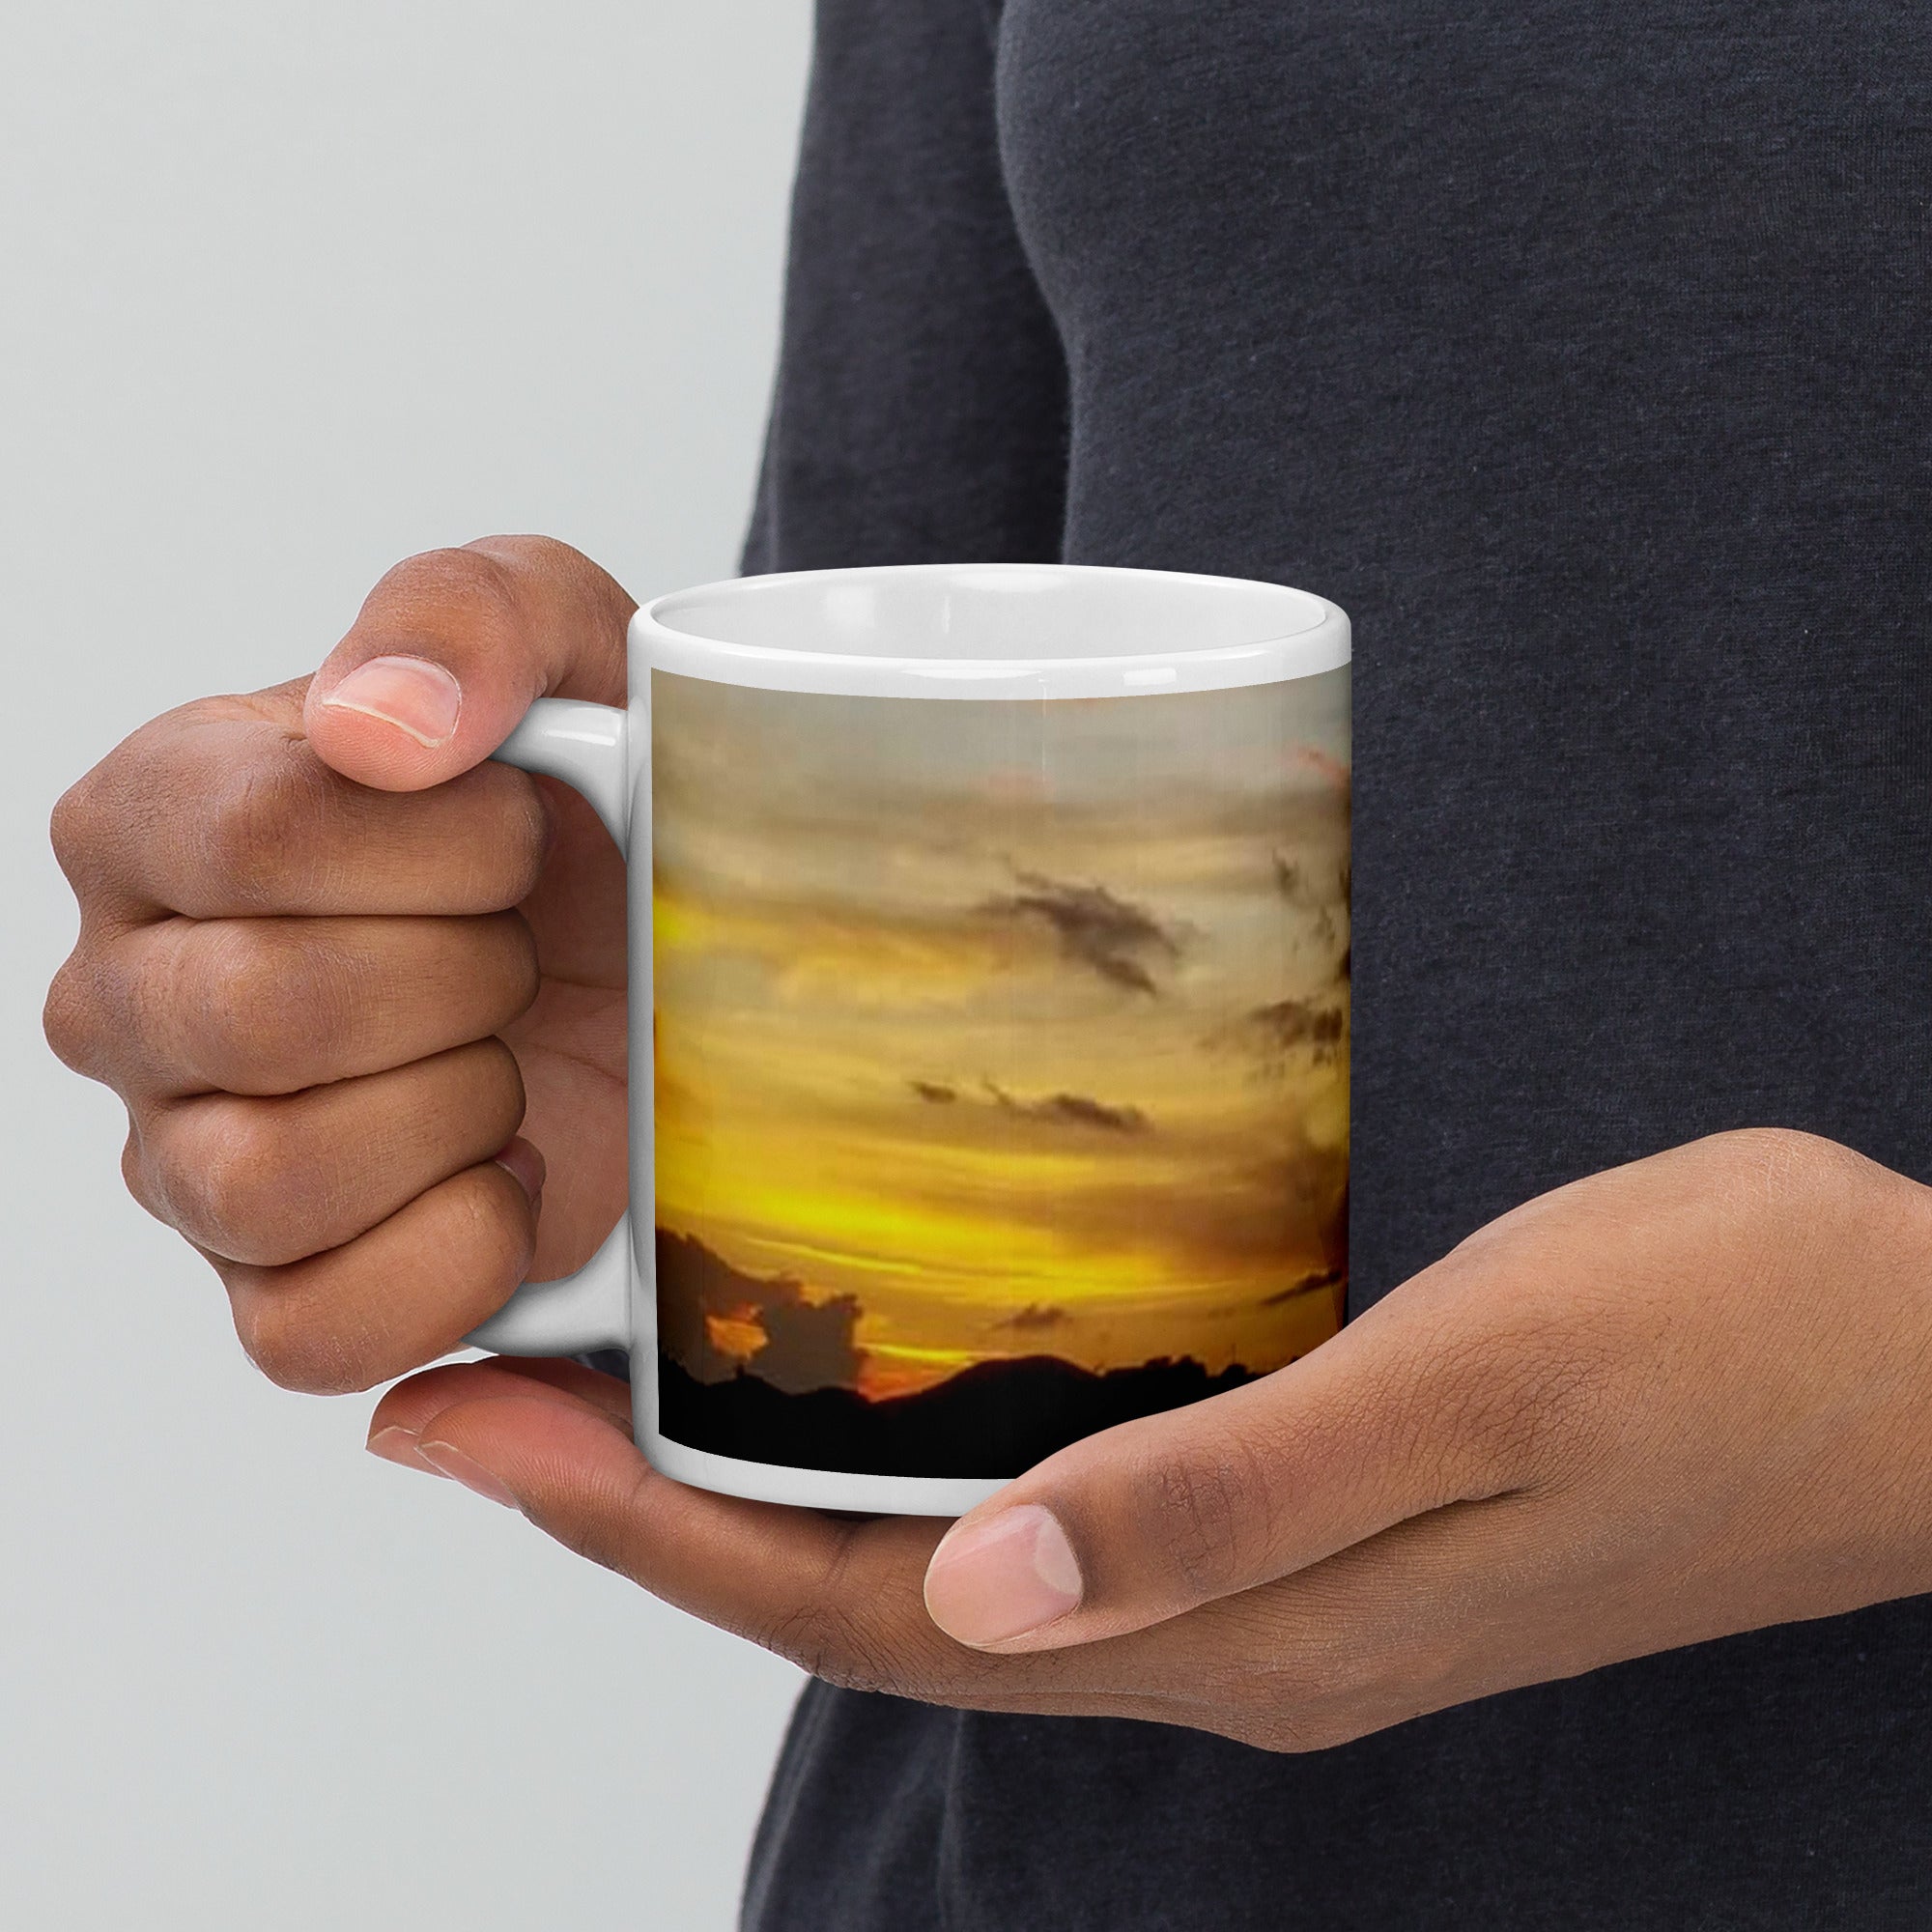 11oz ceramic mug depicting a photo of a lovely sunset in St. Vincent and the Grenadines